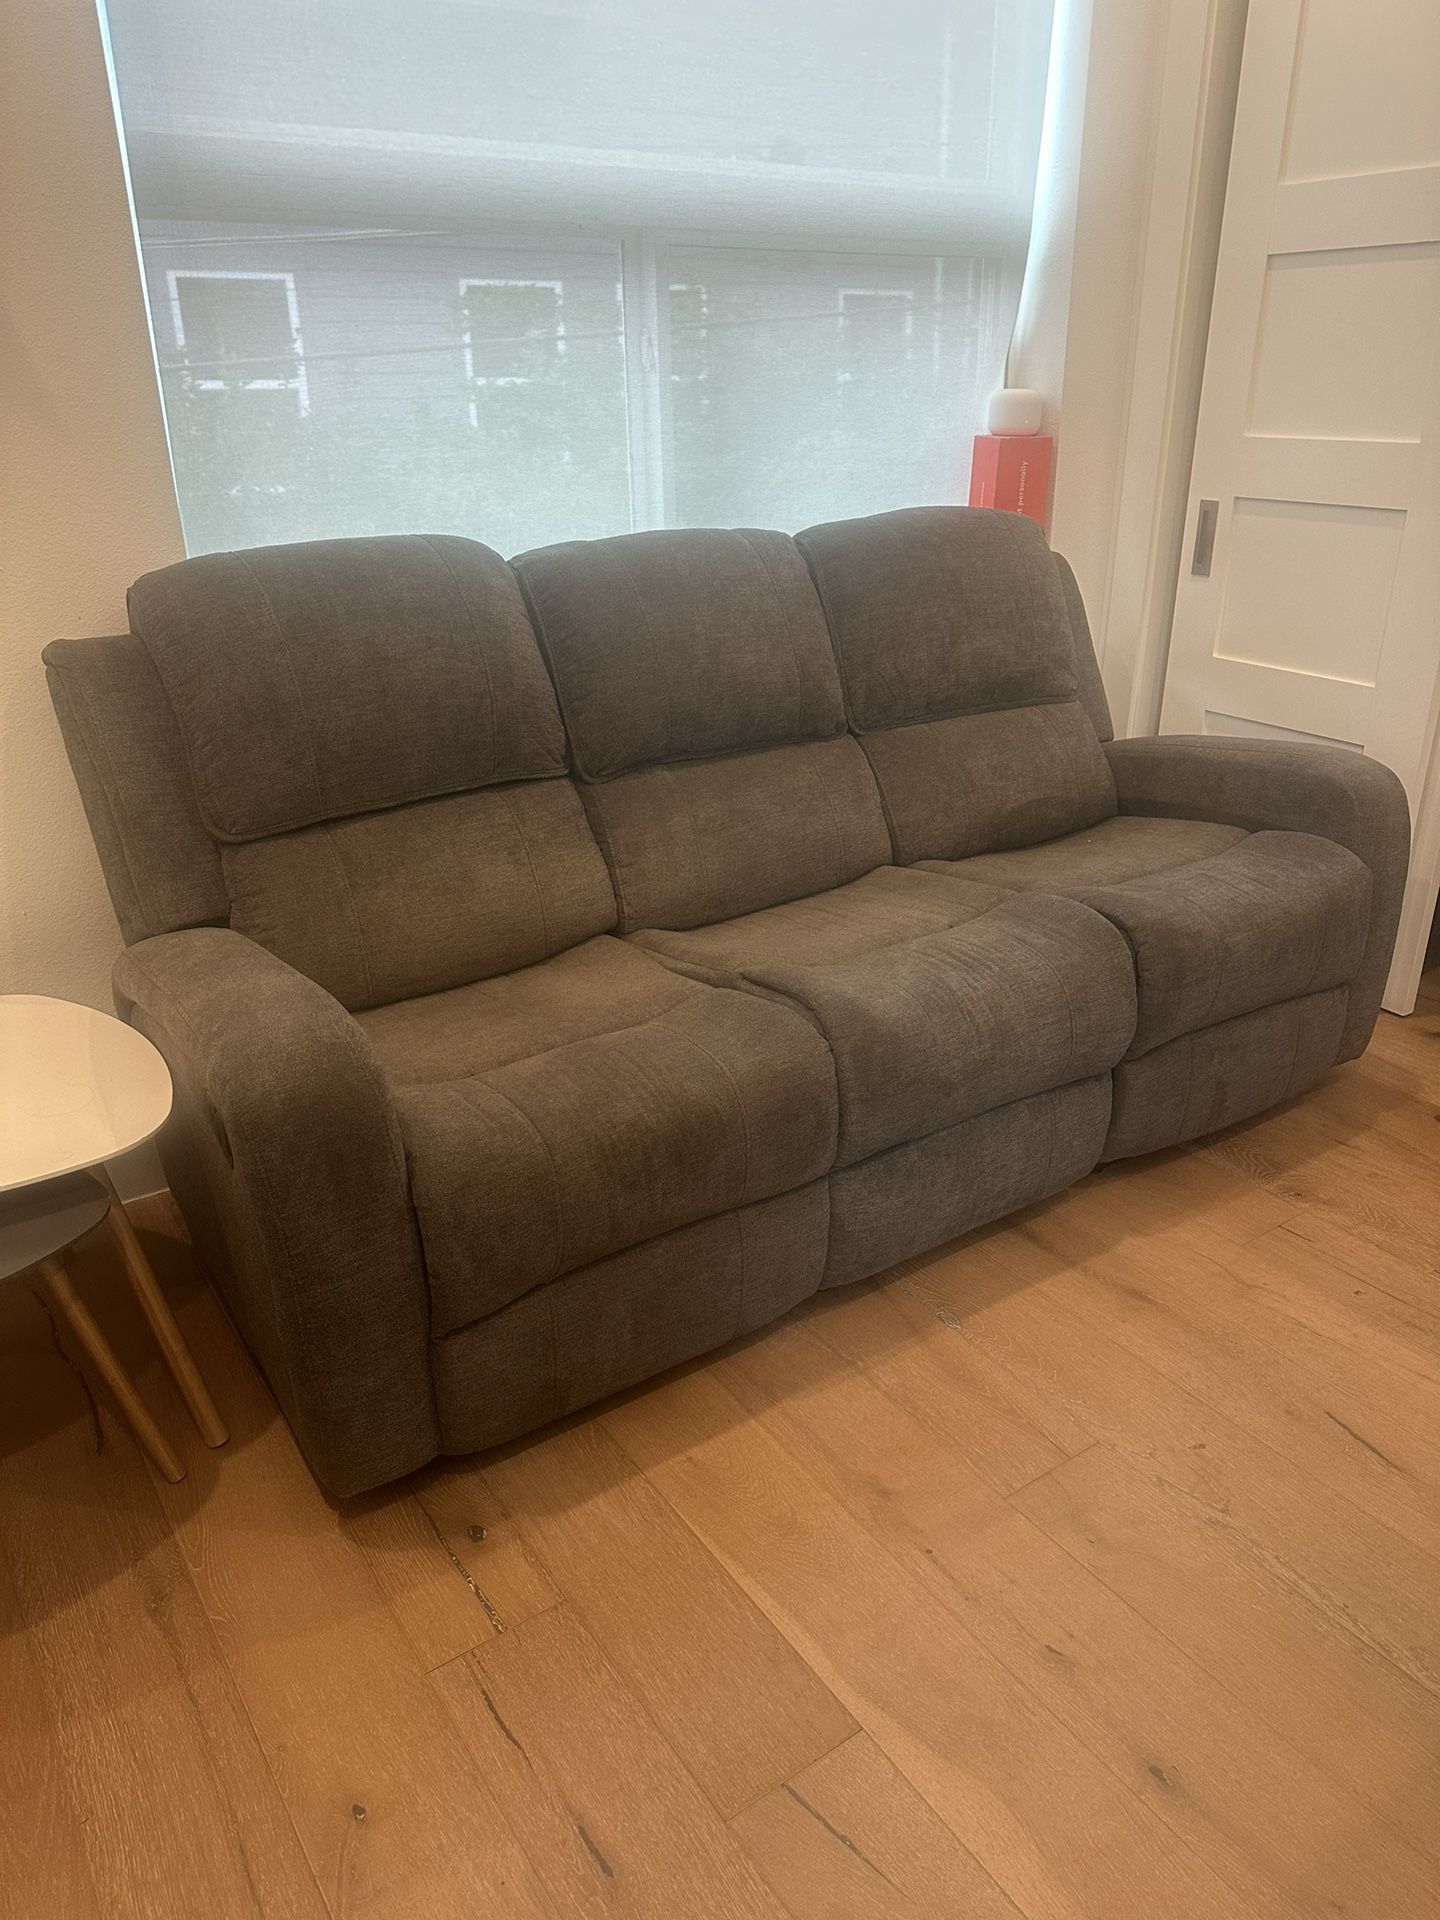 $300 OBO - Living Spaces Reclining Sofa